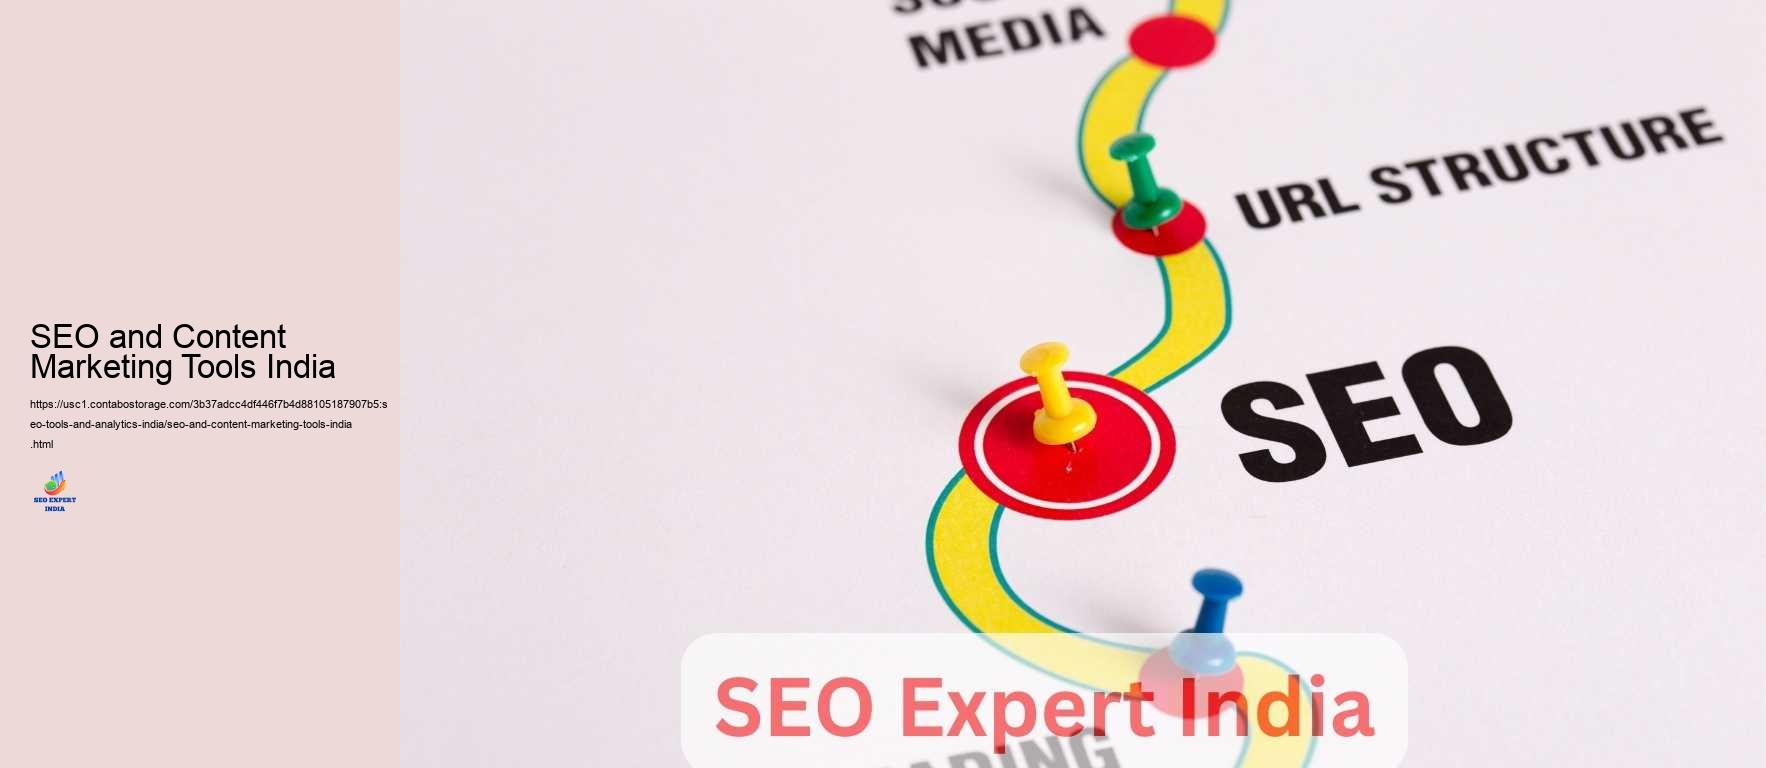 SEO and Content Marketing Tools India